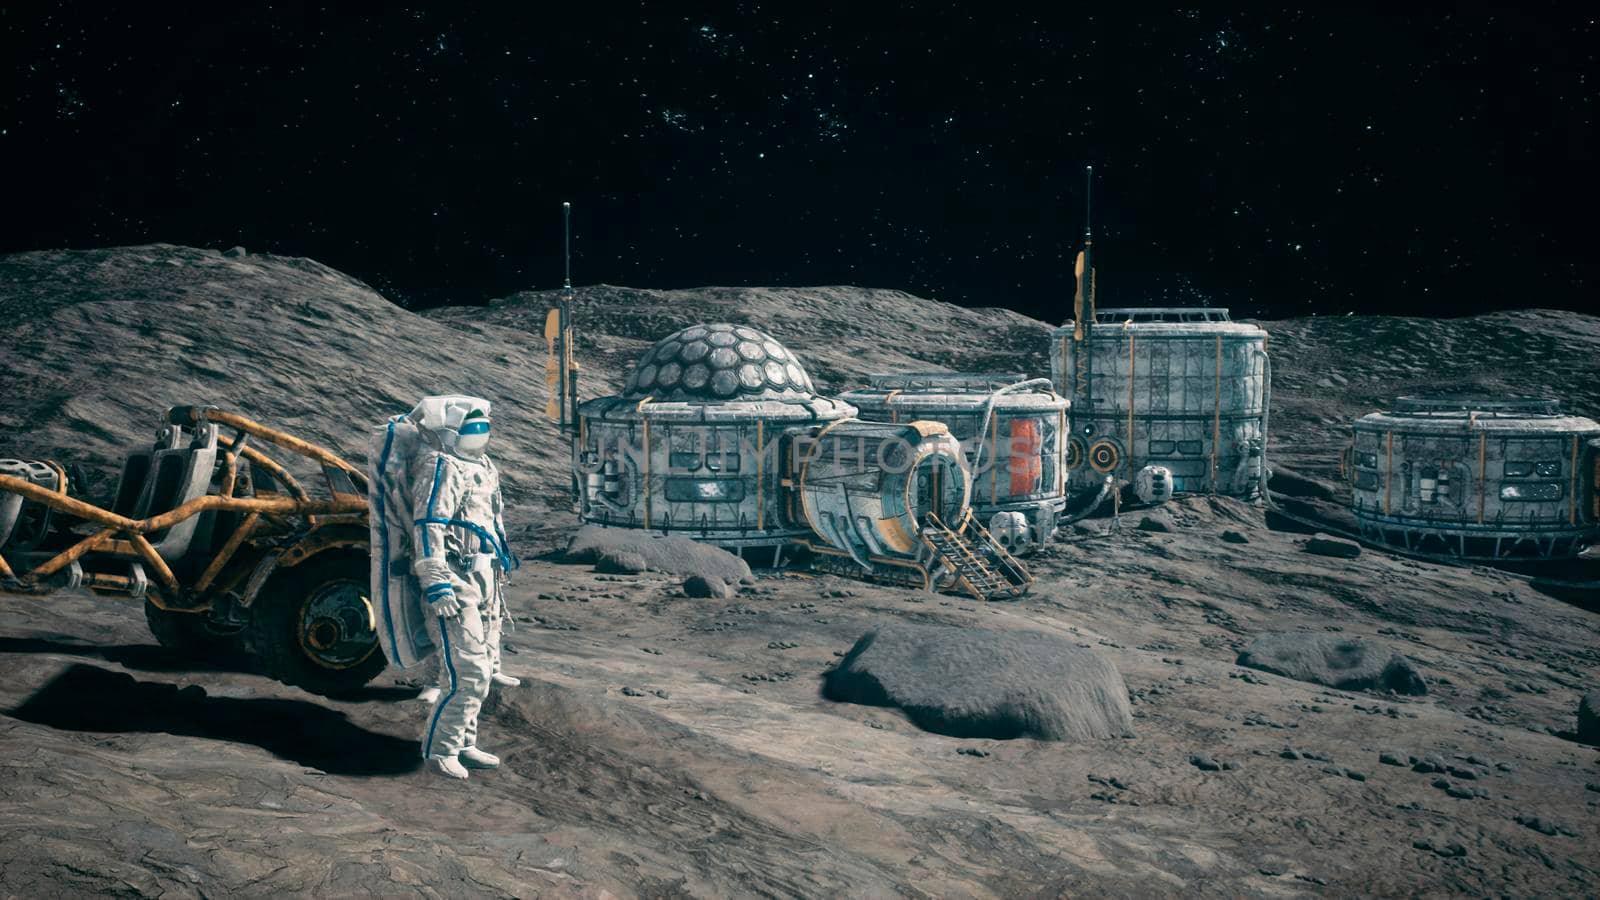 Astronauts near their lunar rover admire the lunar base of their lunar colony. View of the lunar surface and space base.